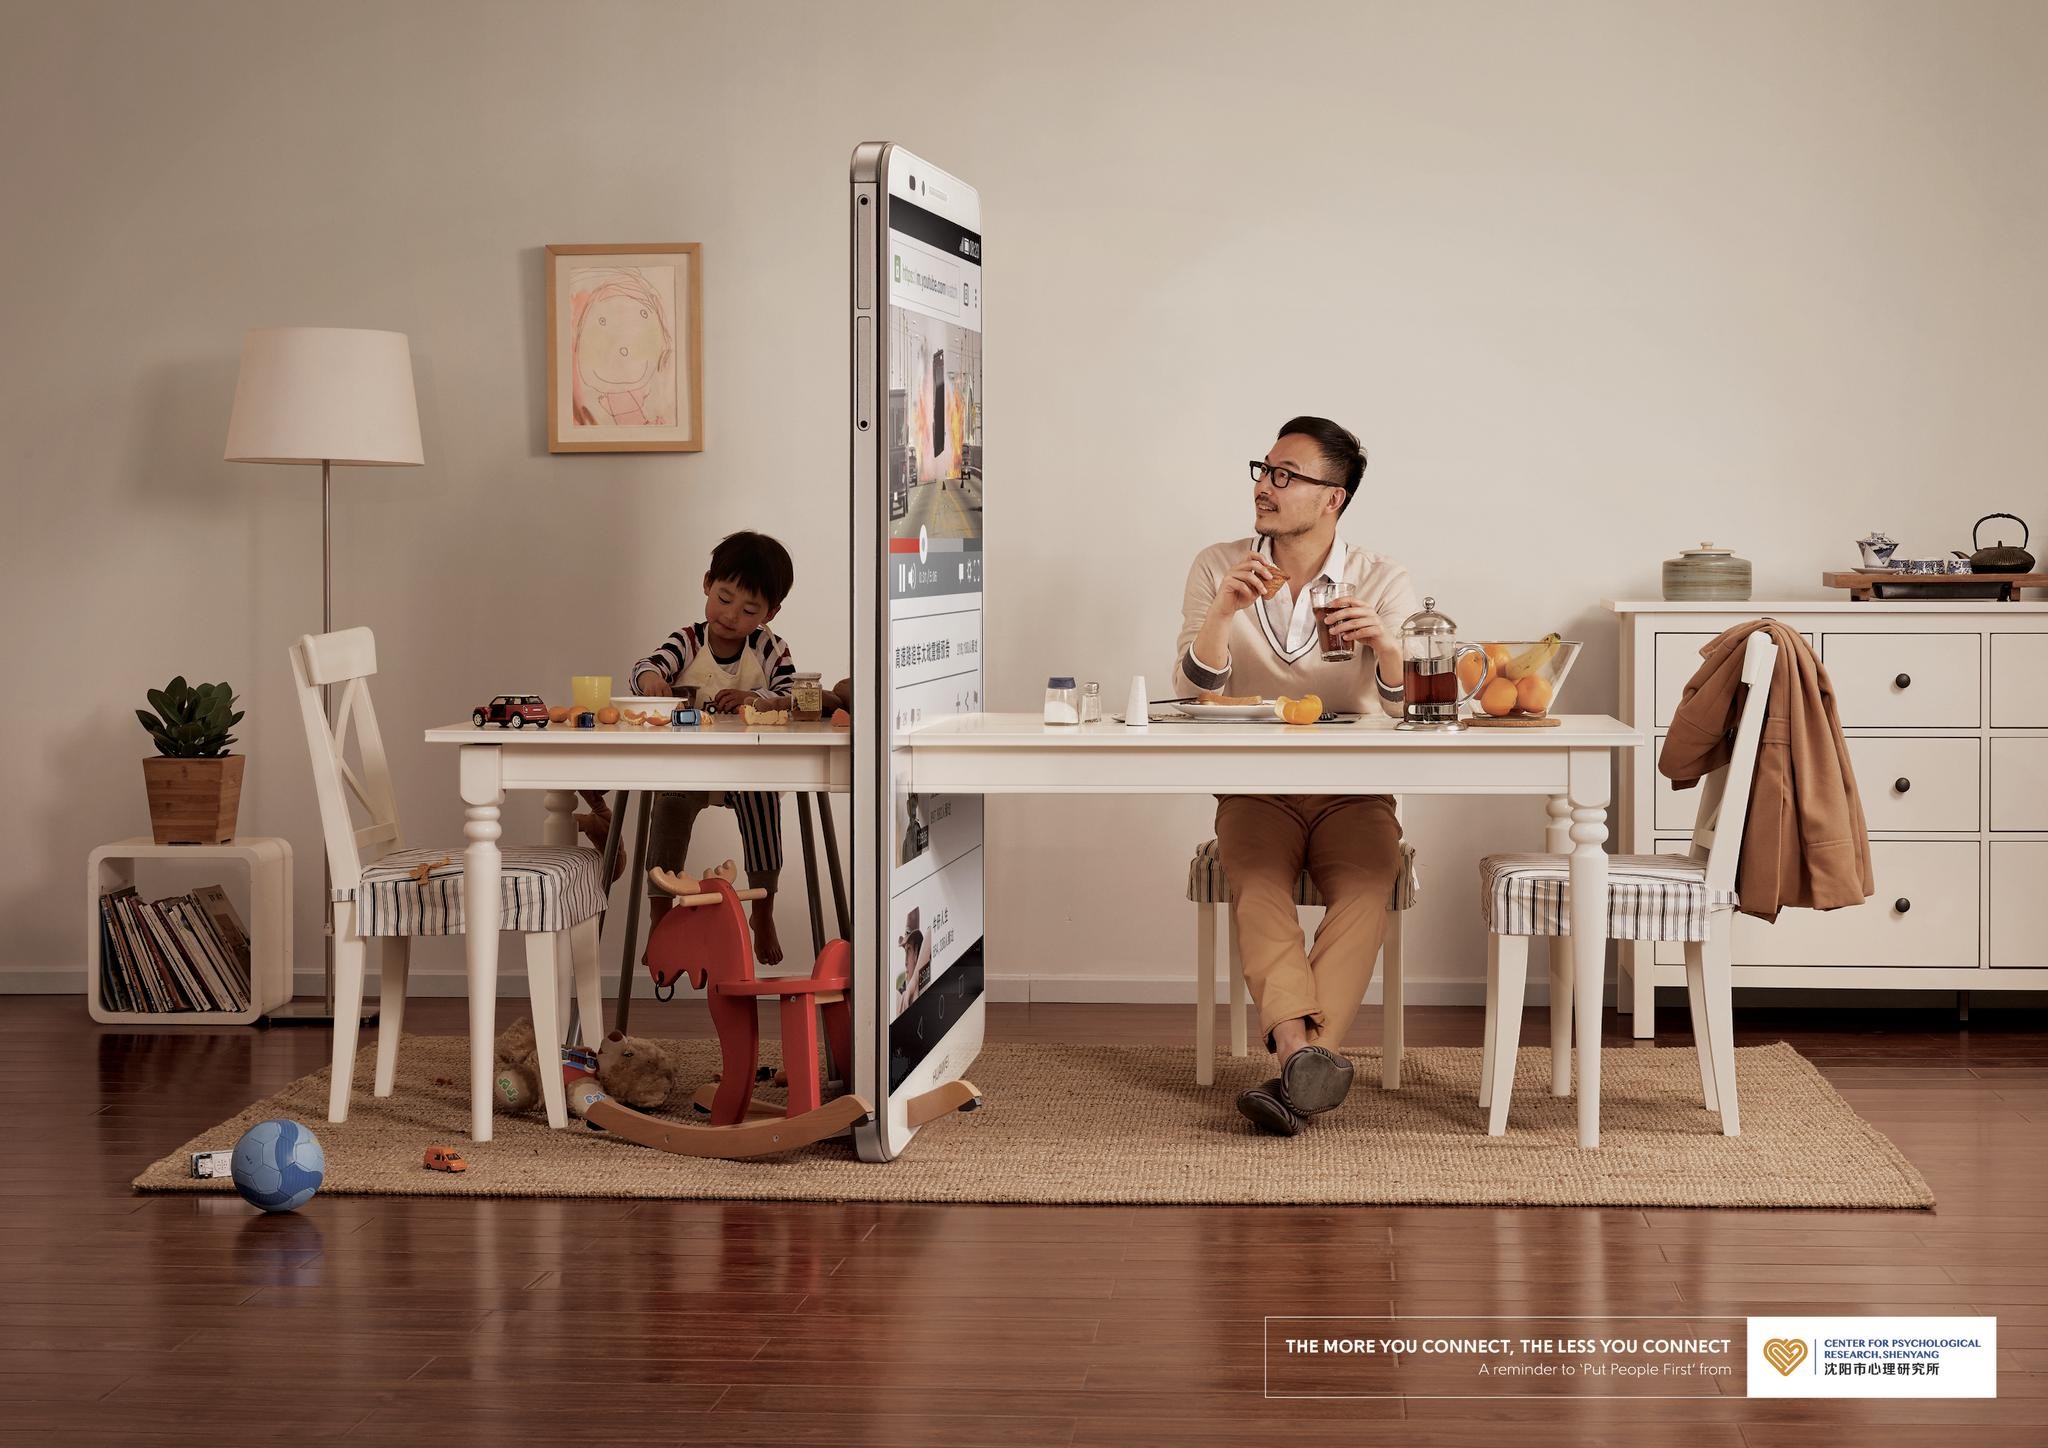 CENTER FOR PSYCHOLOGICAL RESEARCH, SHENYANG PHONE WALL CAMPAIGN - DINING TABLE